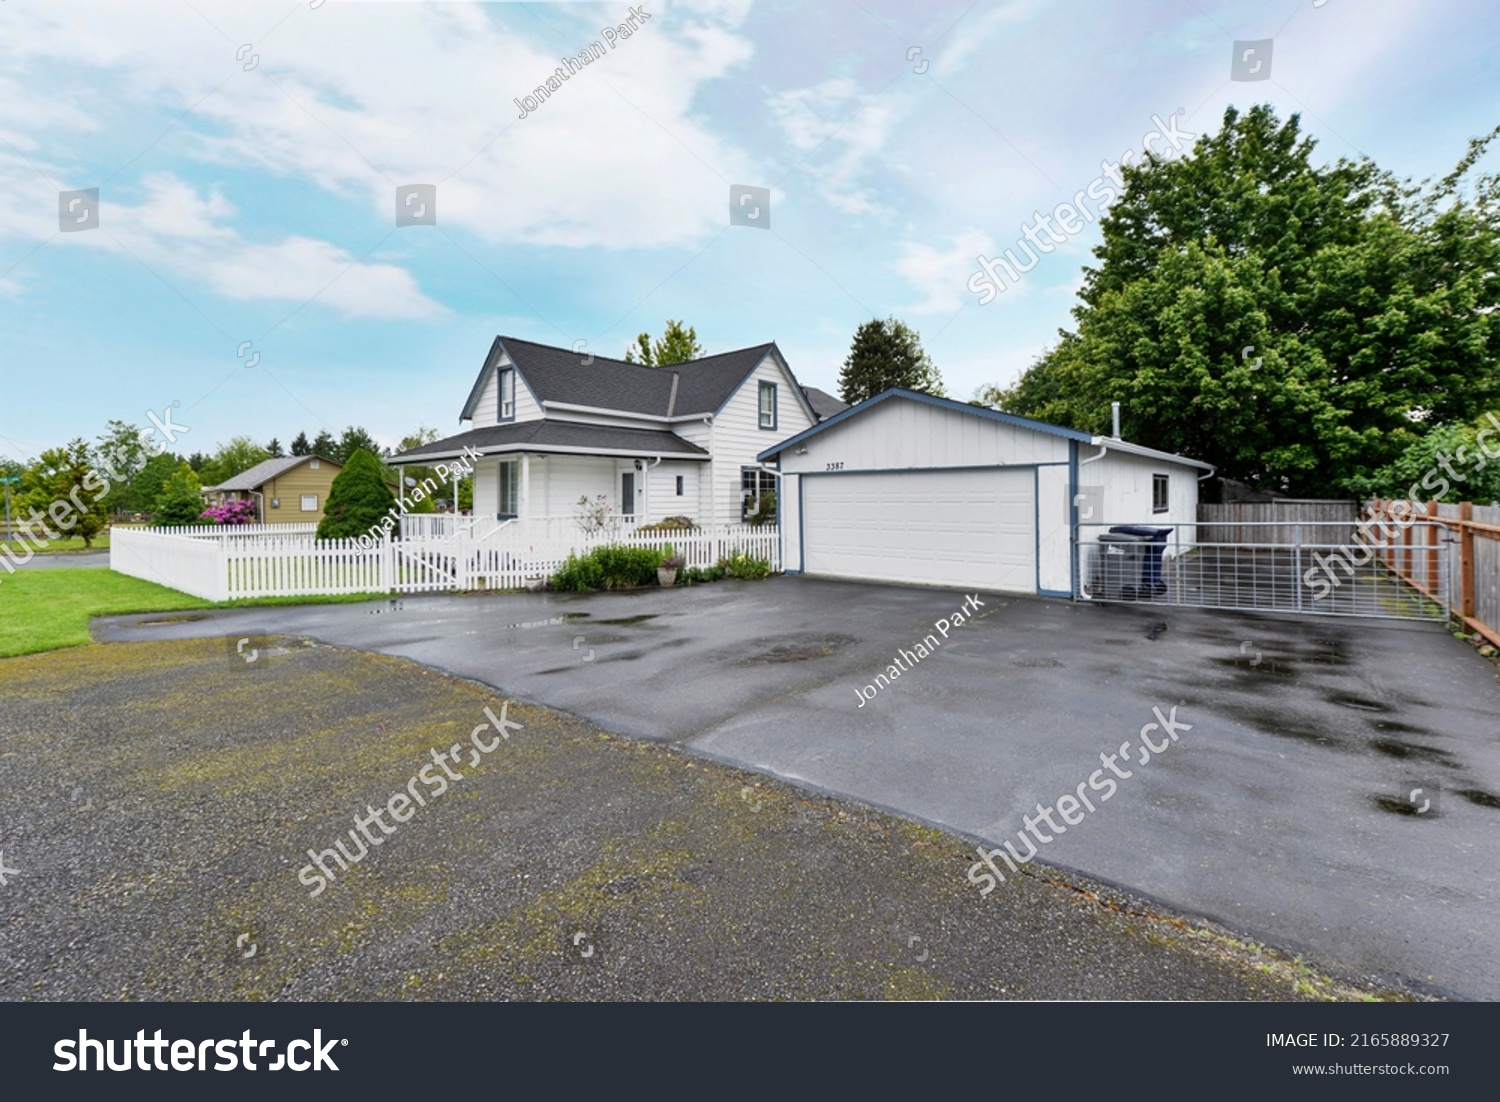 Stock Photo Enumclaw Wa Usa June Modern Residential Front Exterior 2165889327 